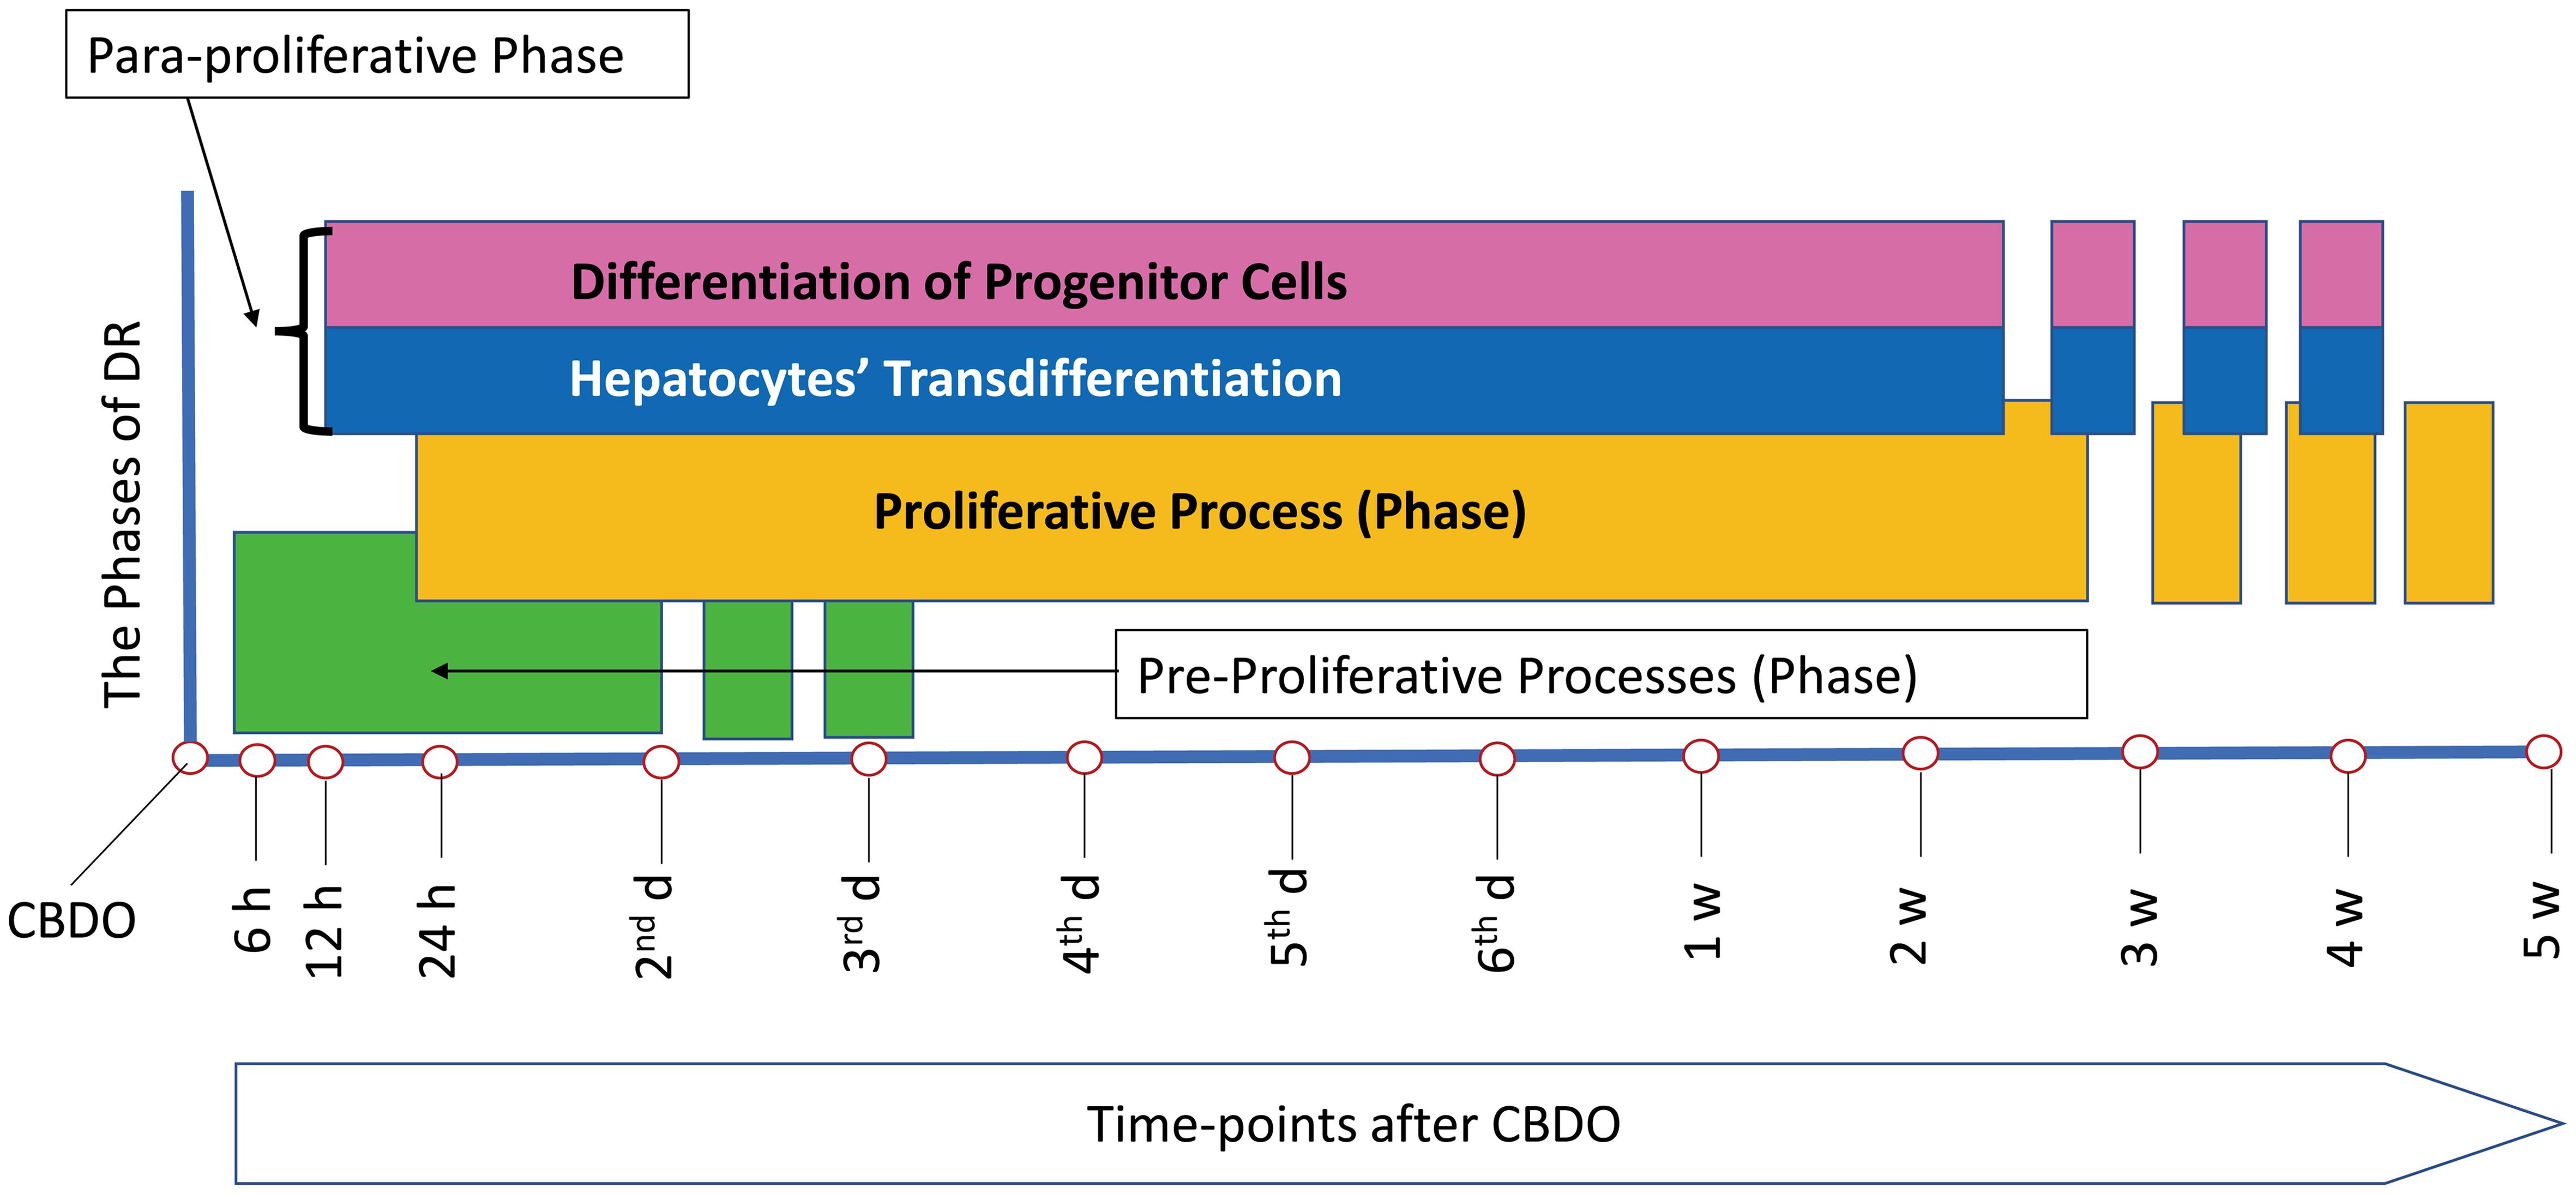 The phases of the ductular reaction induced by CBDO in rats.